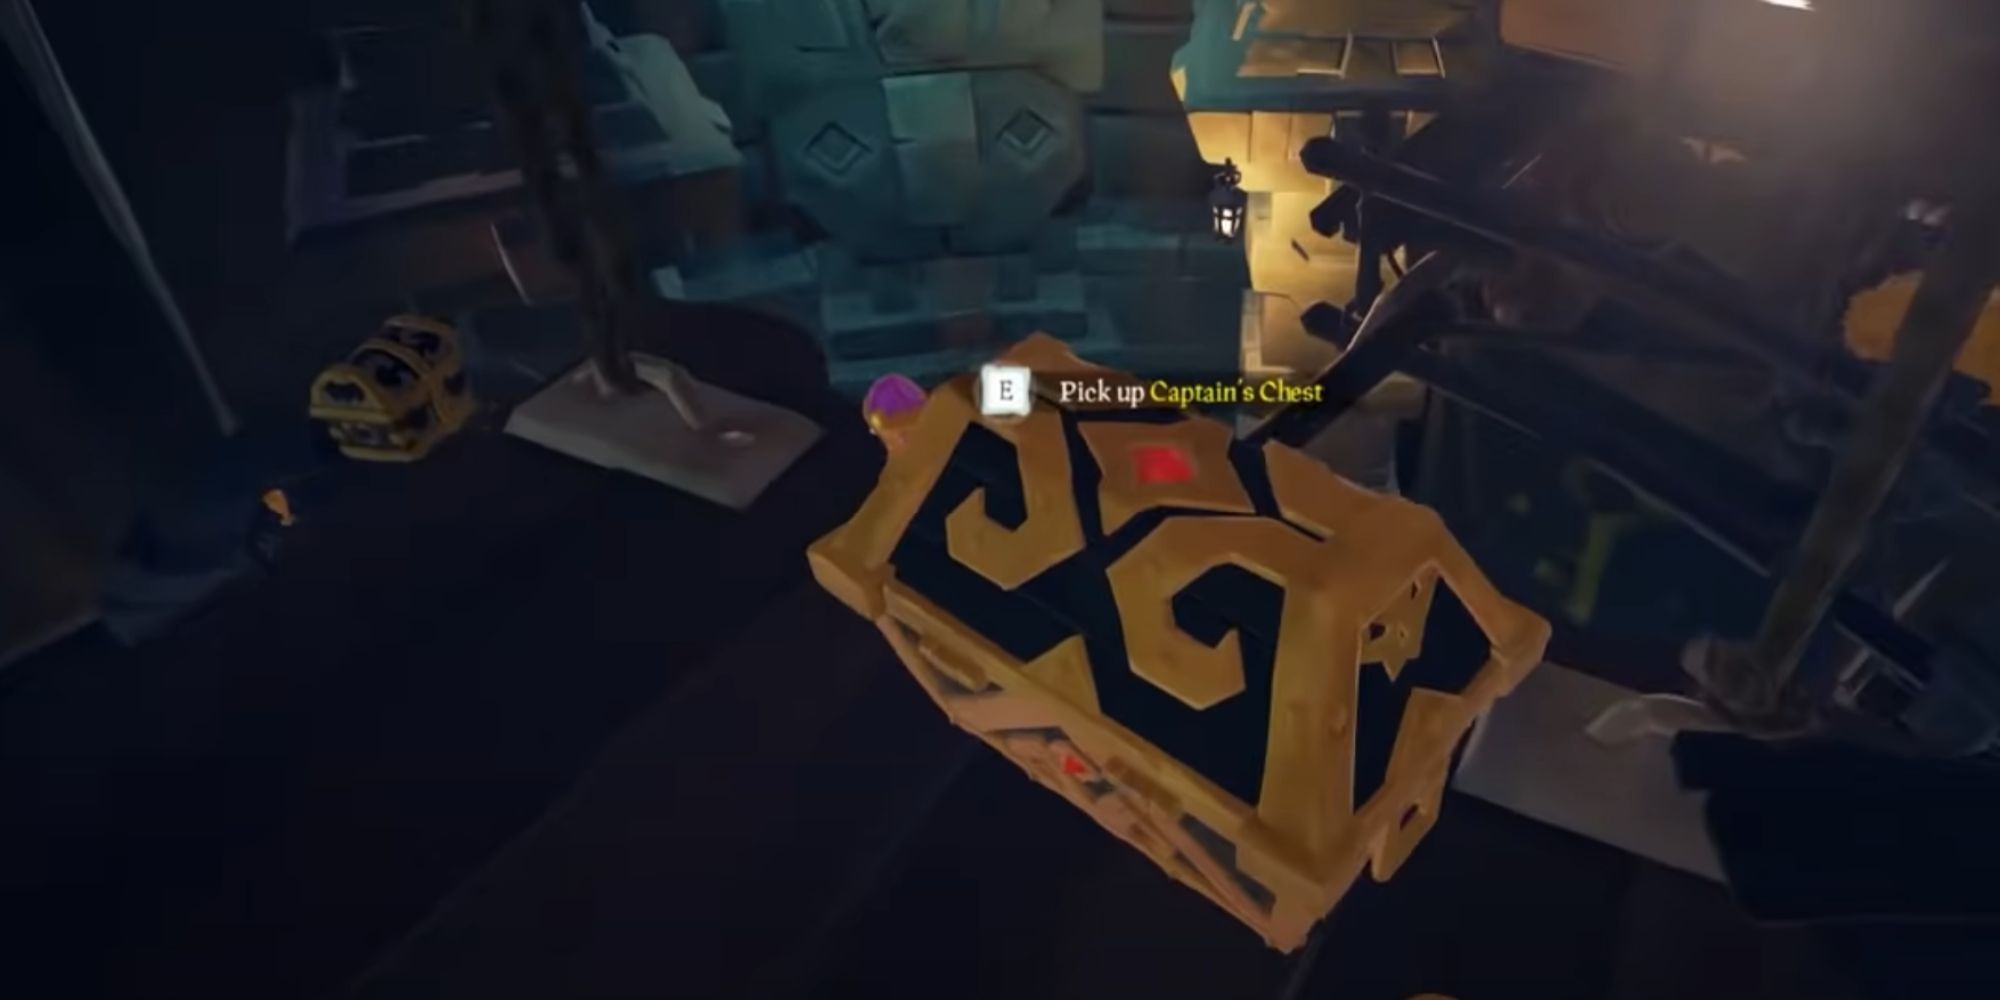 sea_of_thieves_captain's_chest_inside_a_vault